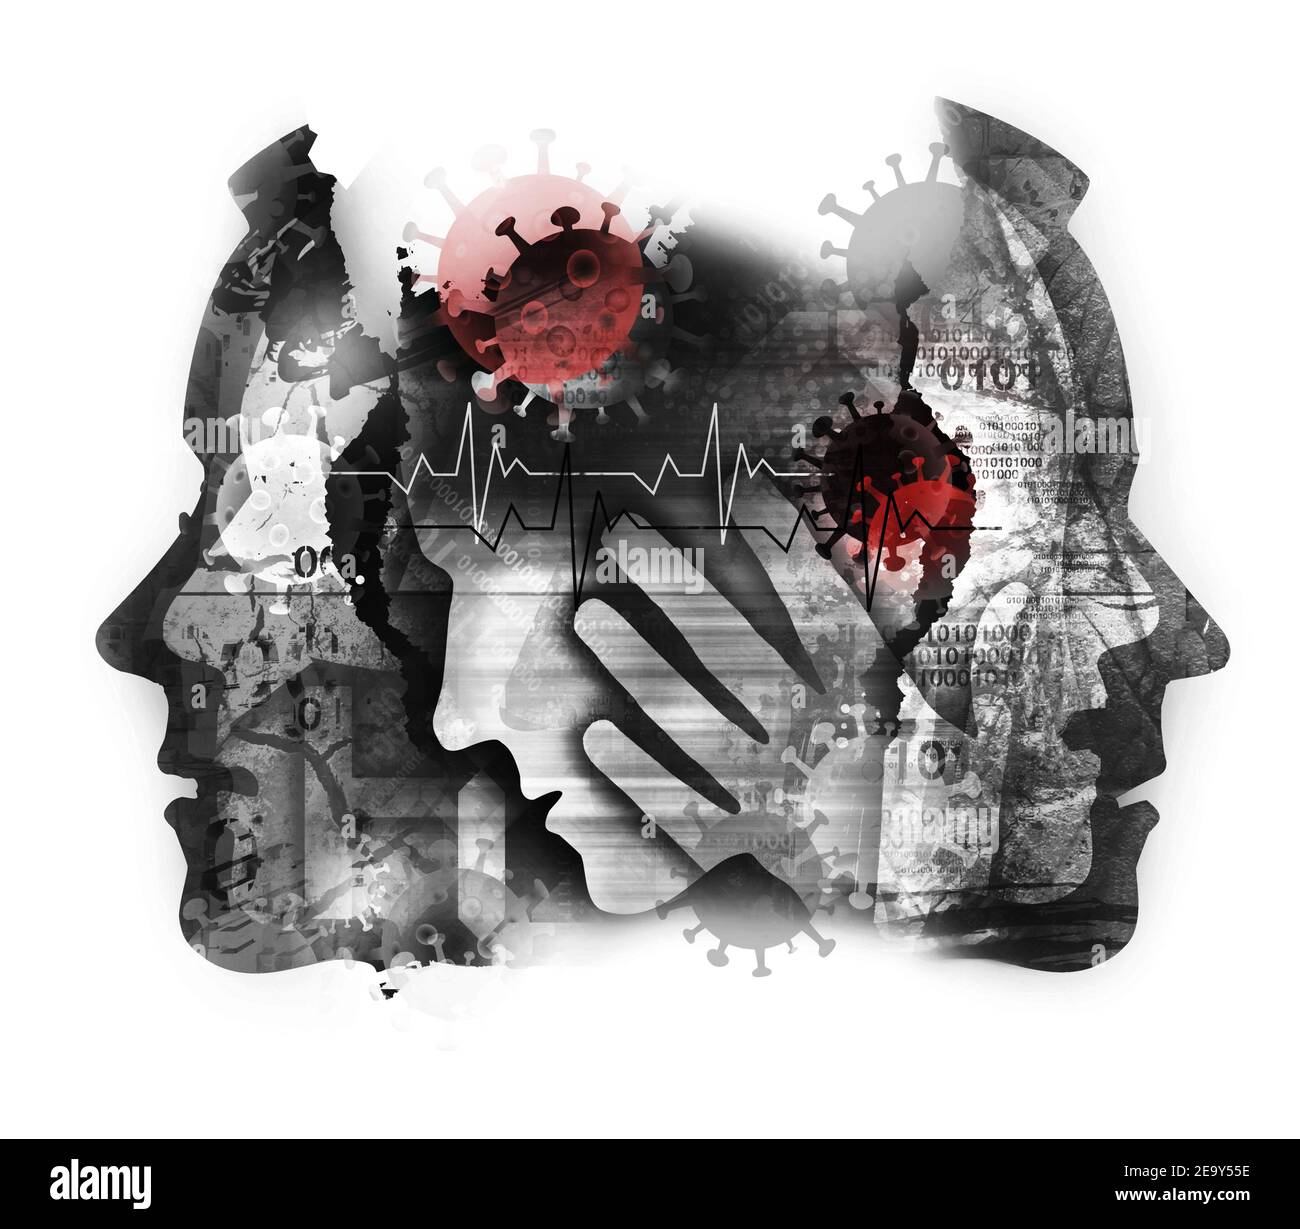 Pandemic of coronavirus, human suffering and pain, patients and victims.Male heads, grunge expressive composition of stylized heads silhouettes. Stock Photo